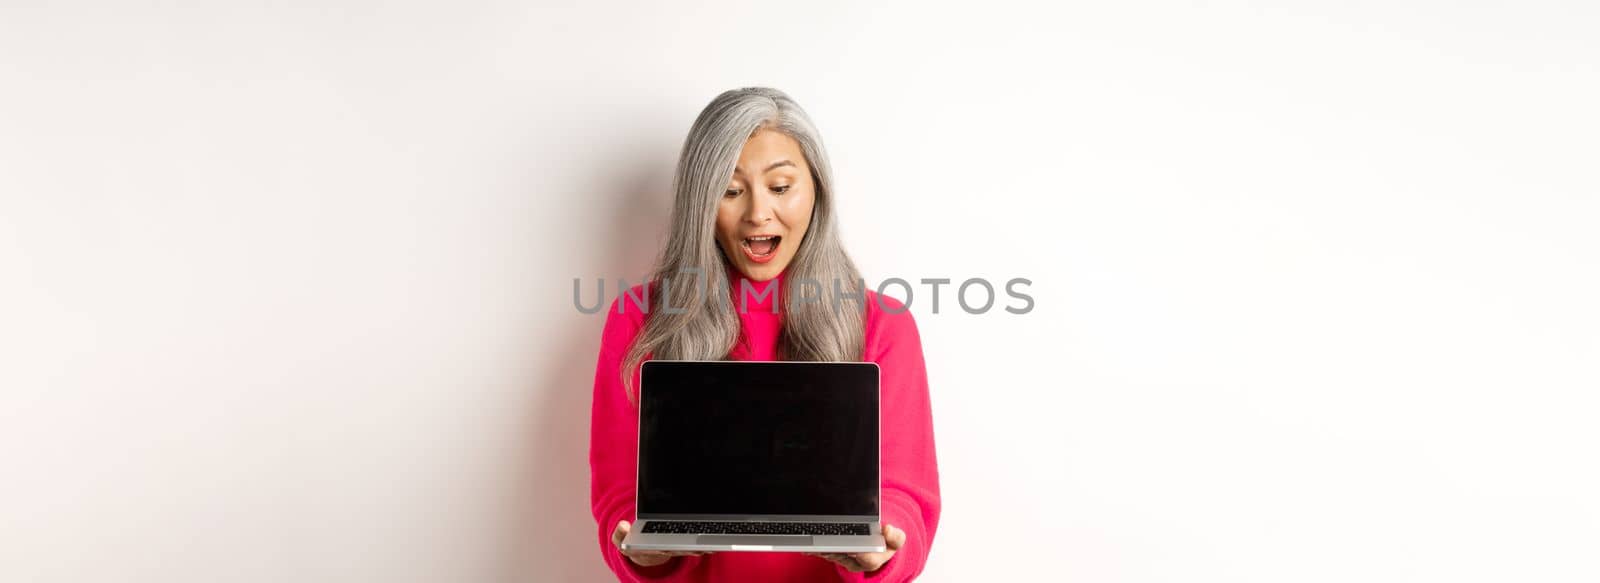 E-commerce concept. Amazed asian grandmother with grey hair, checking out promo online, showing laptop black screen, standing over white background.